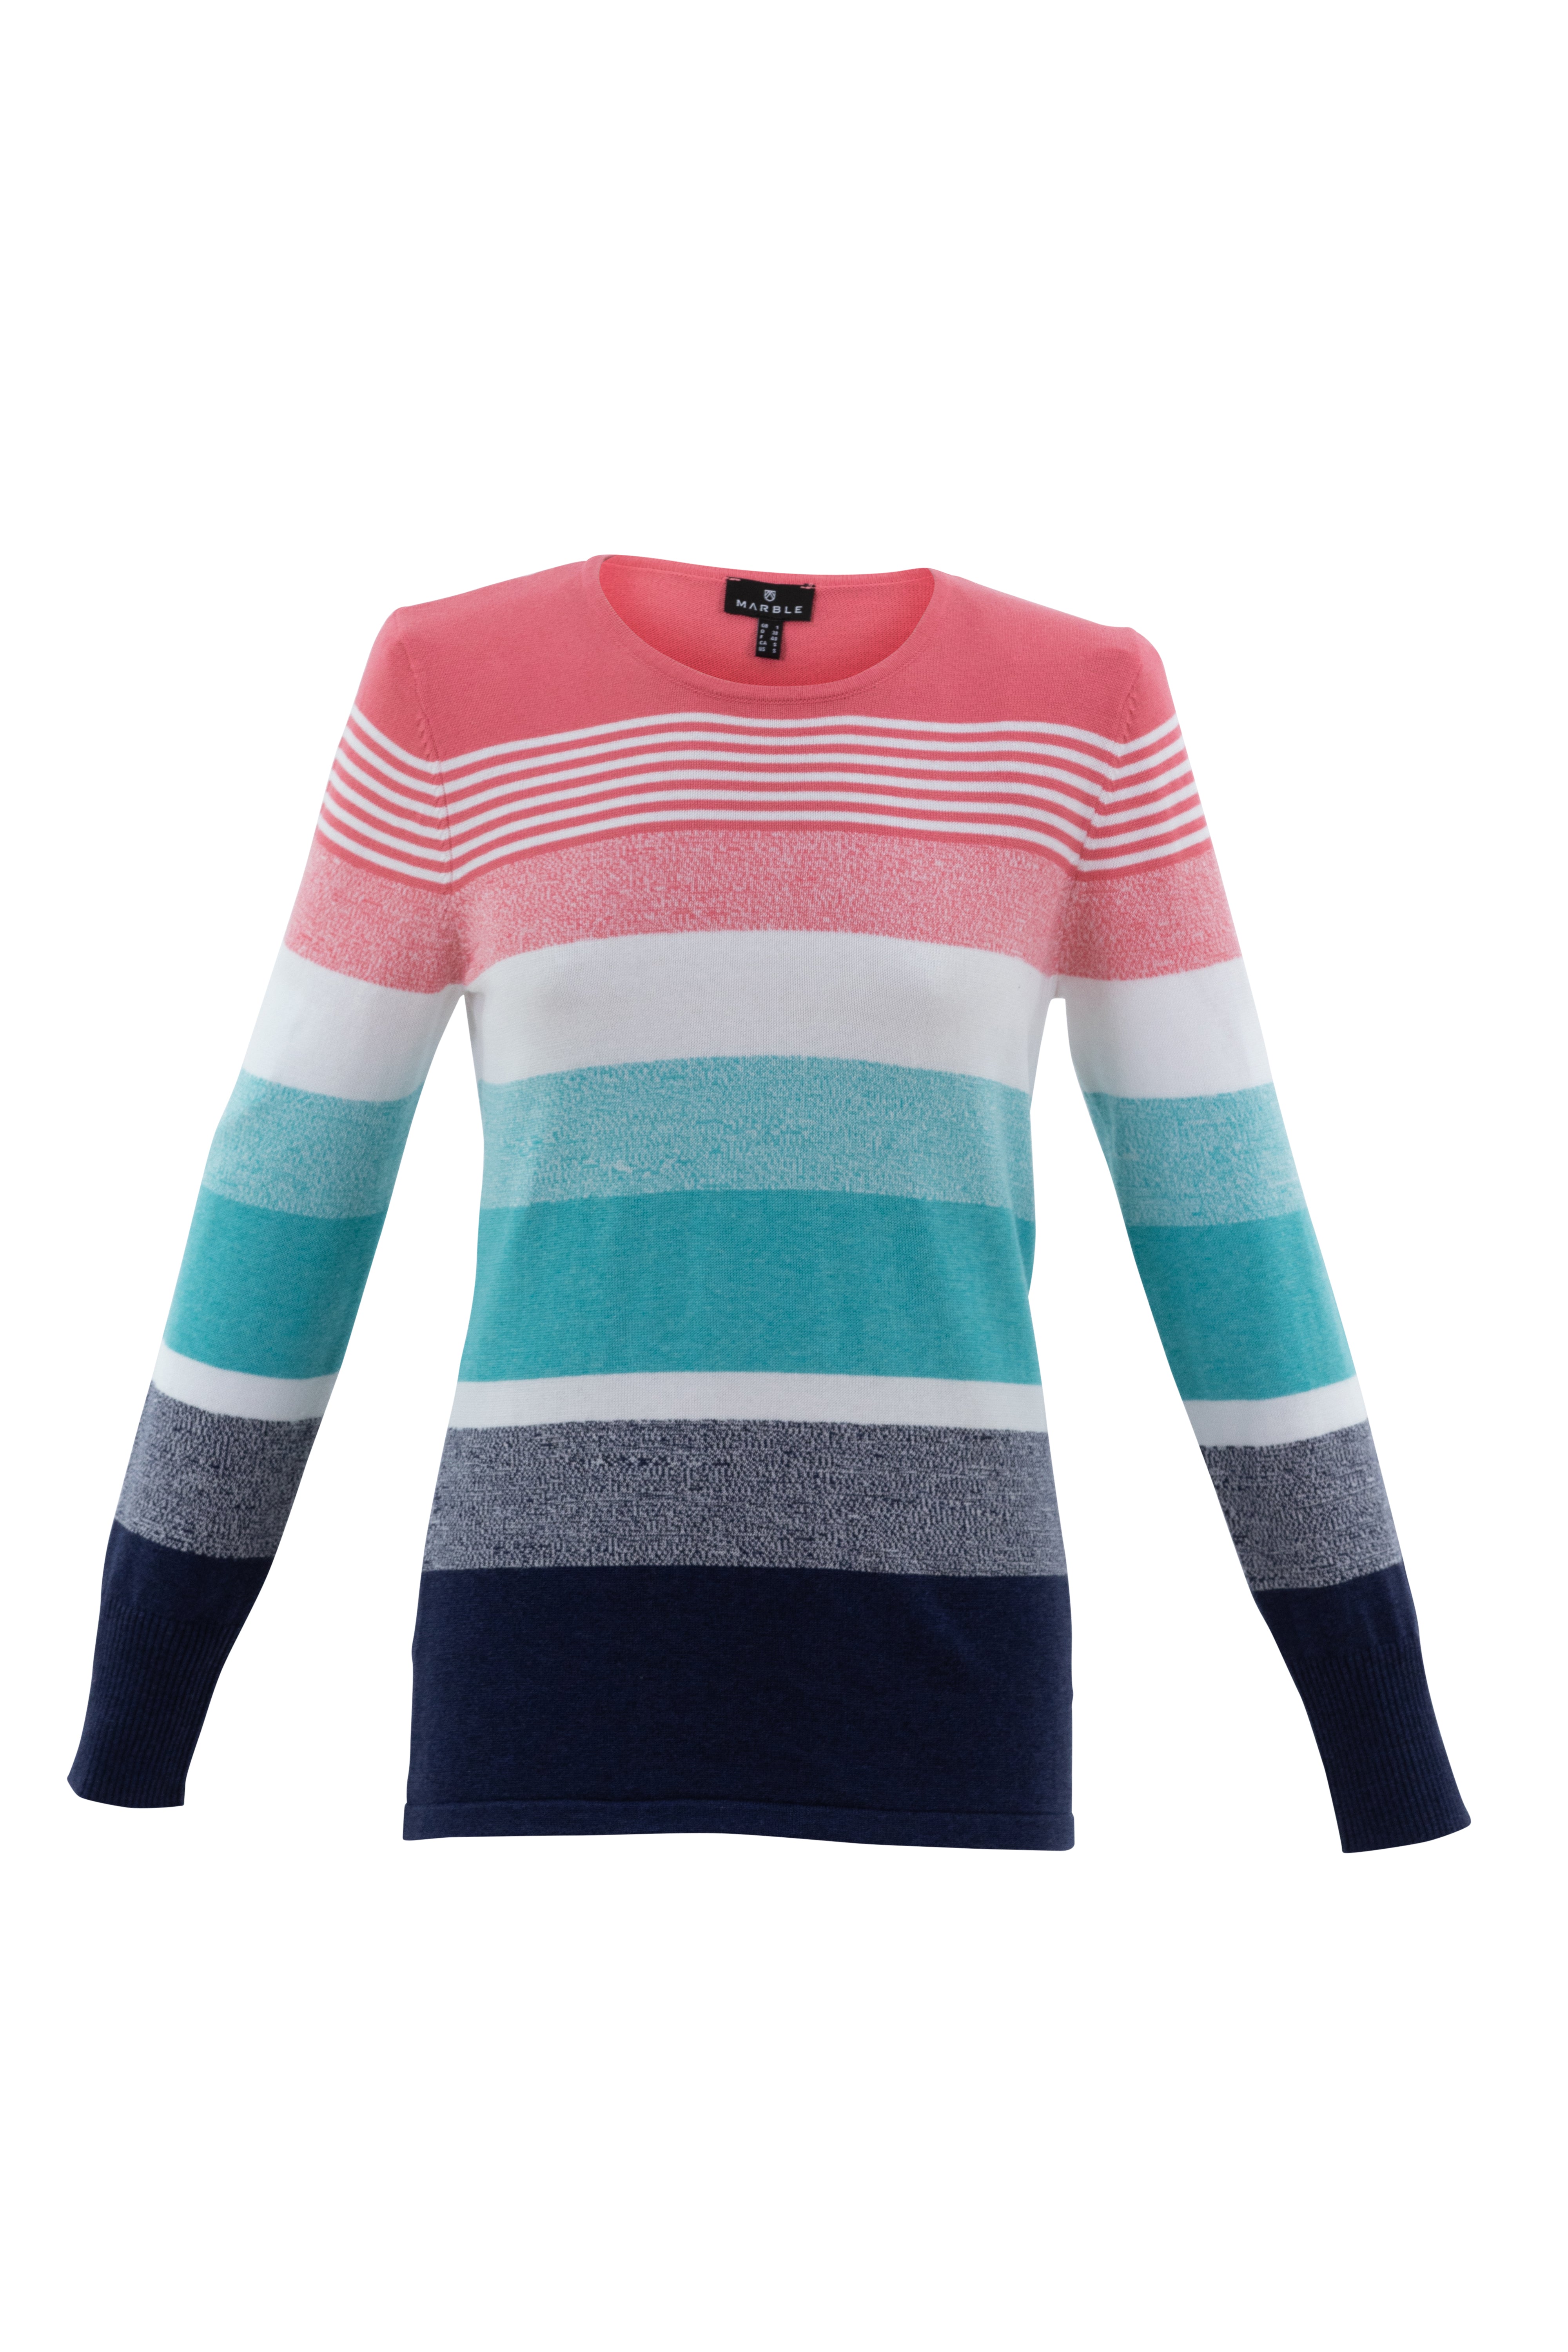 Super soft 100% cotton classic fit 4 colour (white, coral, turq, navy) stripe sweater with branded button detail on rib cuff

